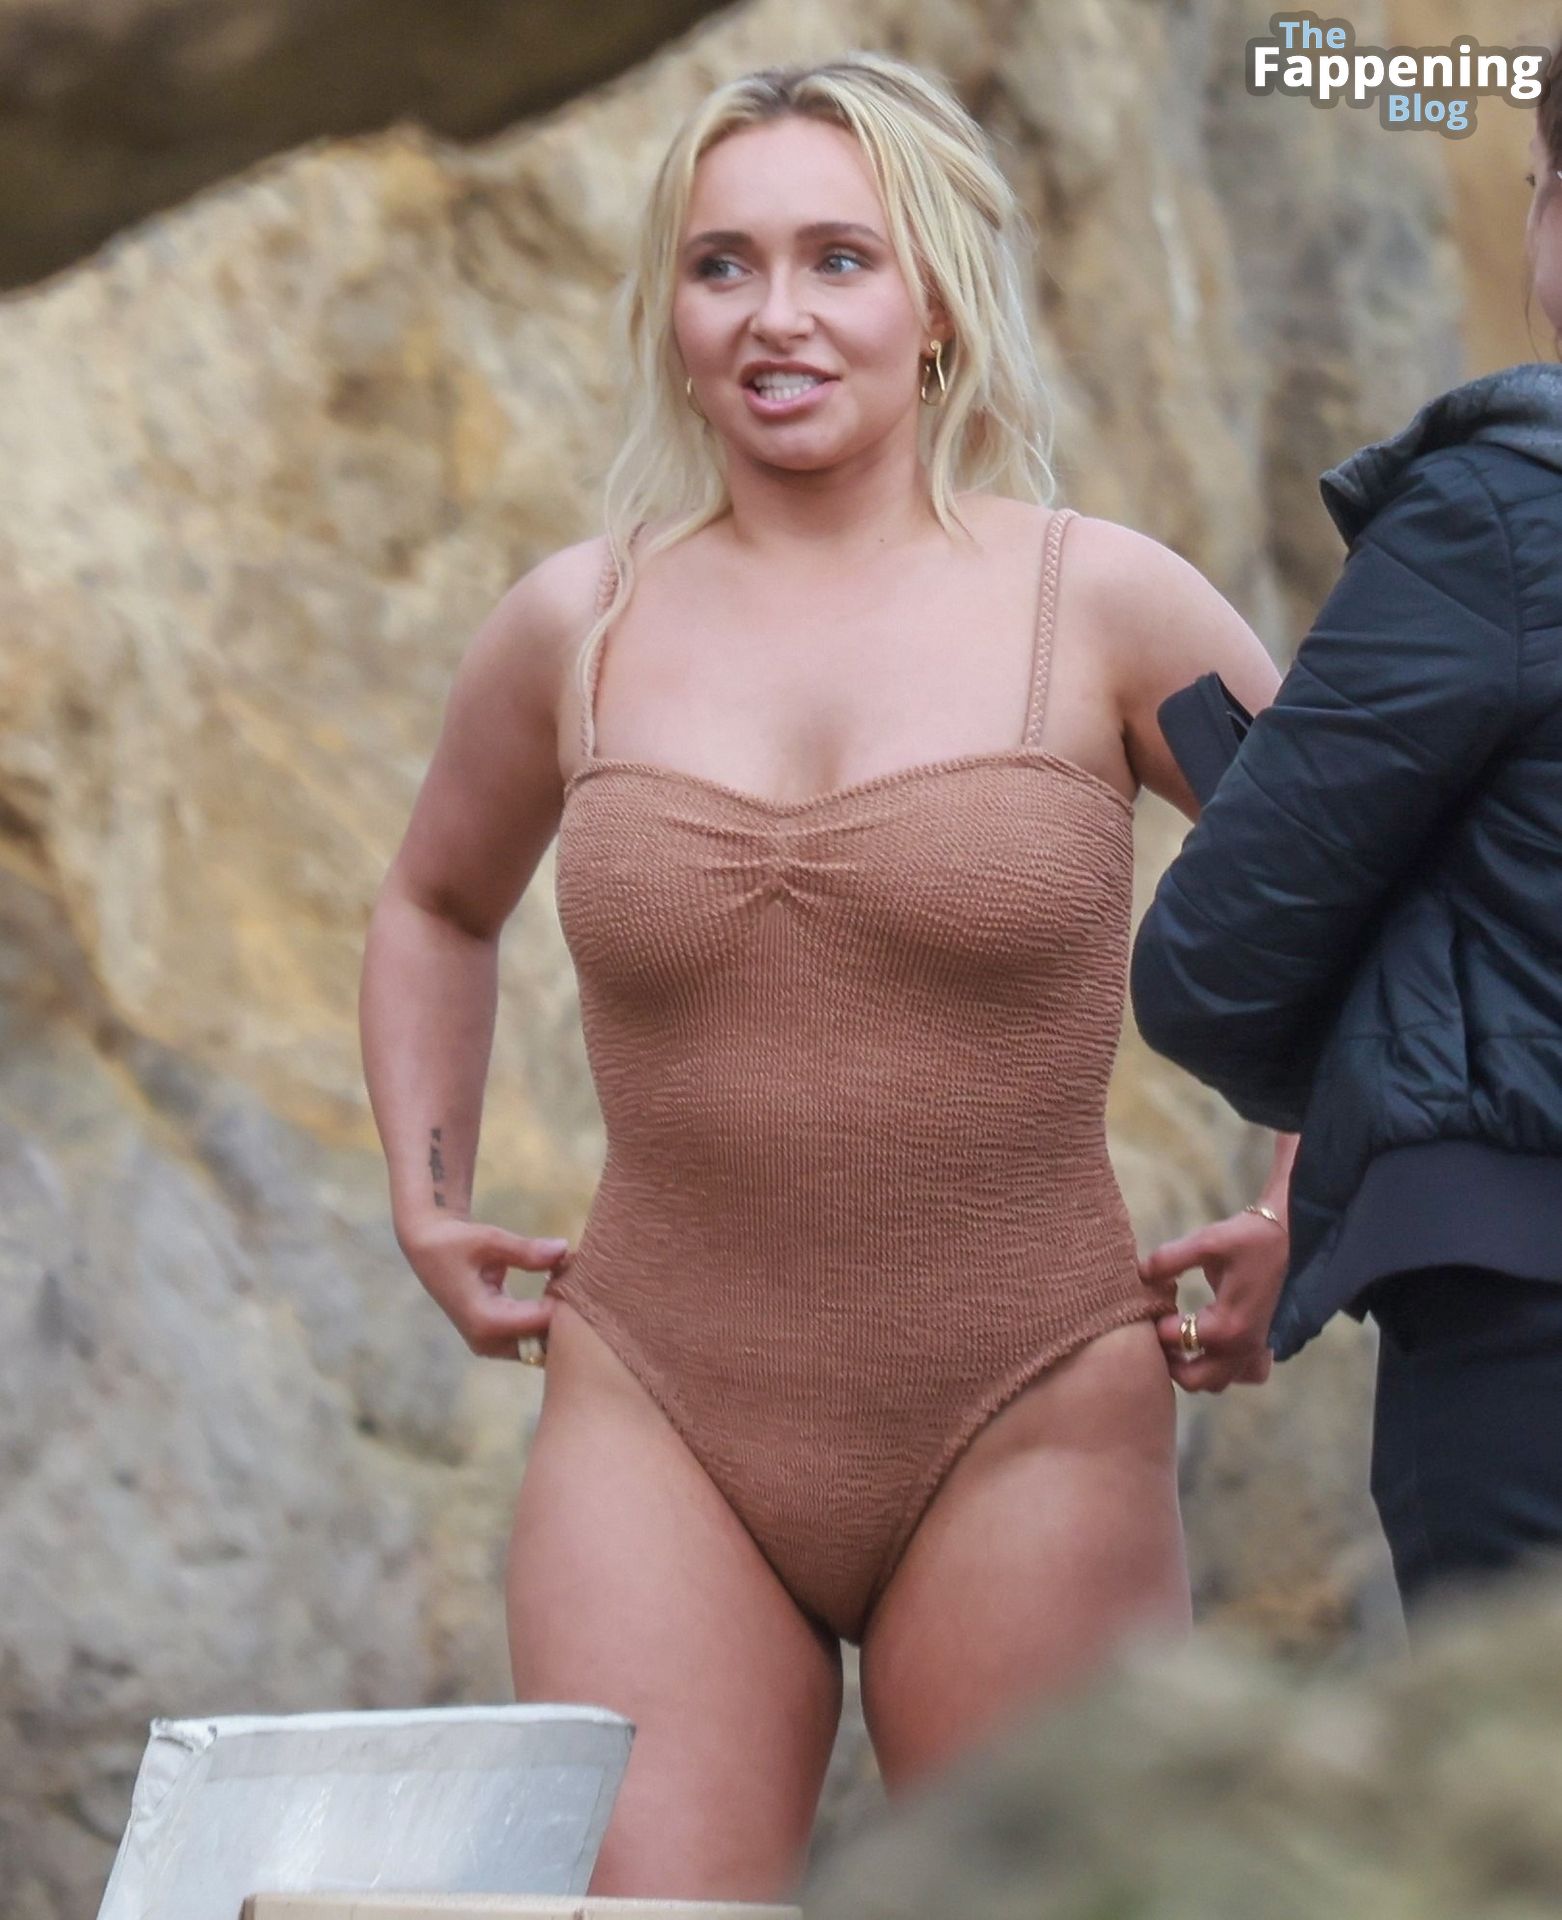 Hayden-Panettiere-Sexy-The-Fappening-Blog-70.jpg